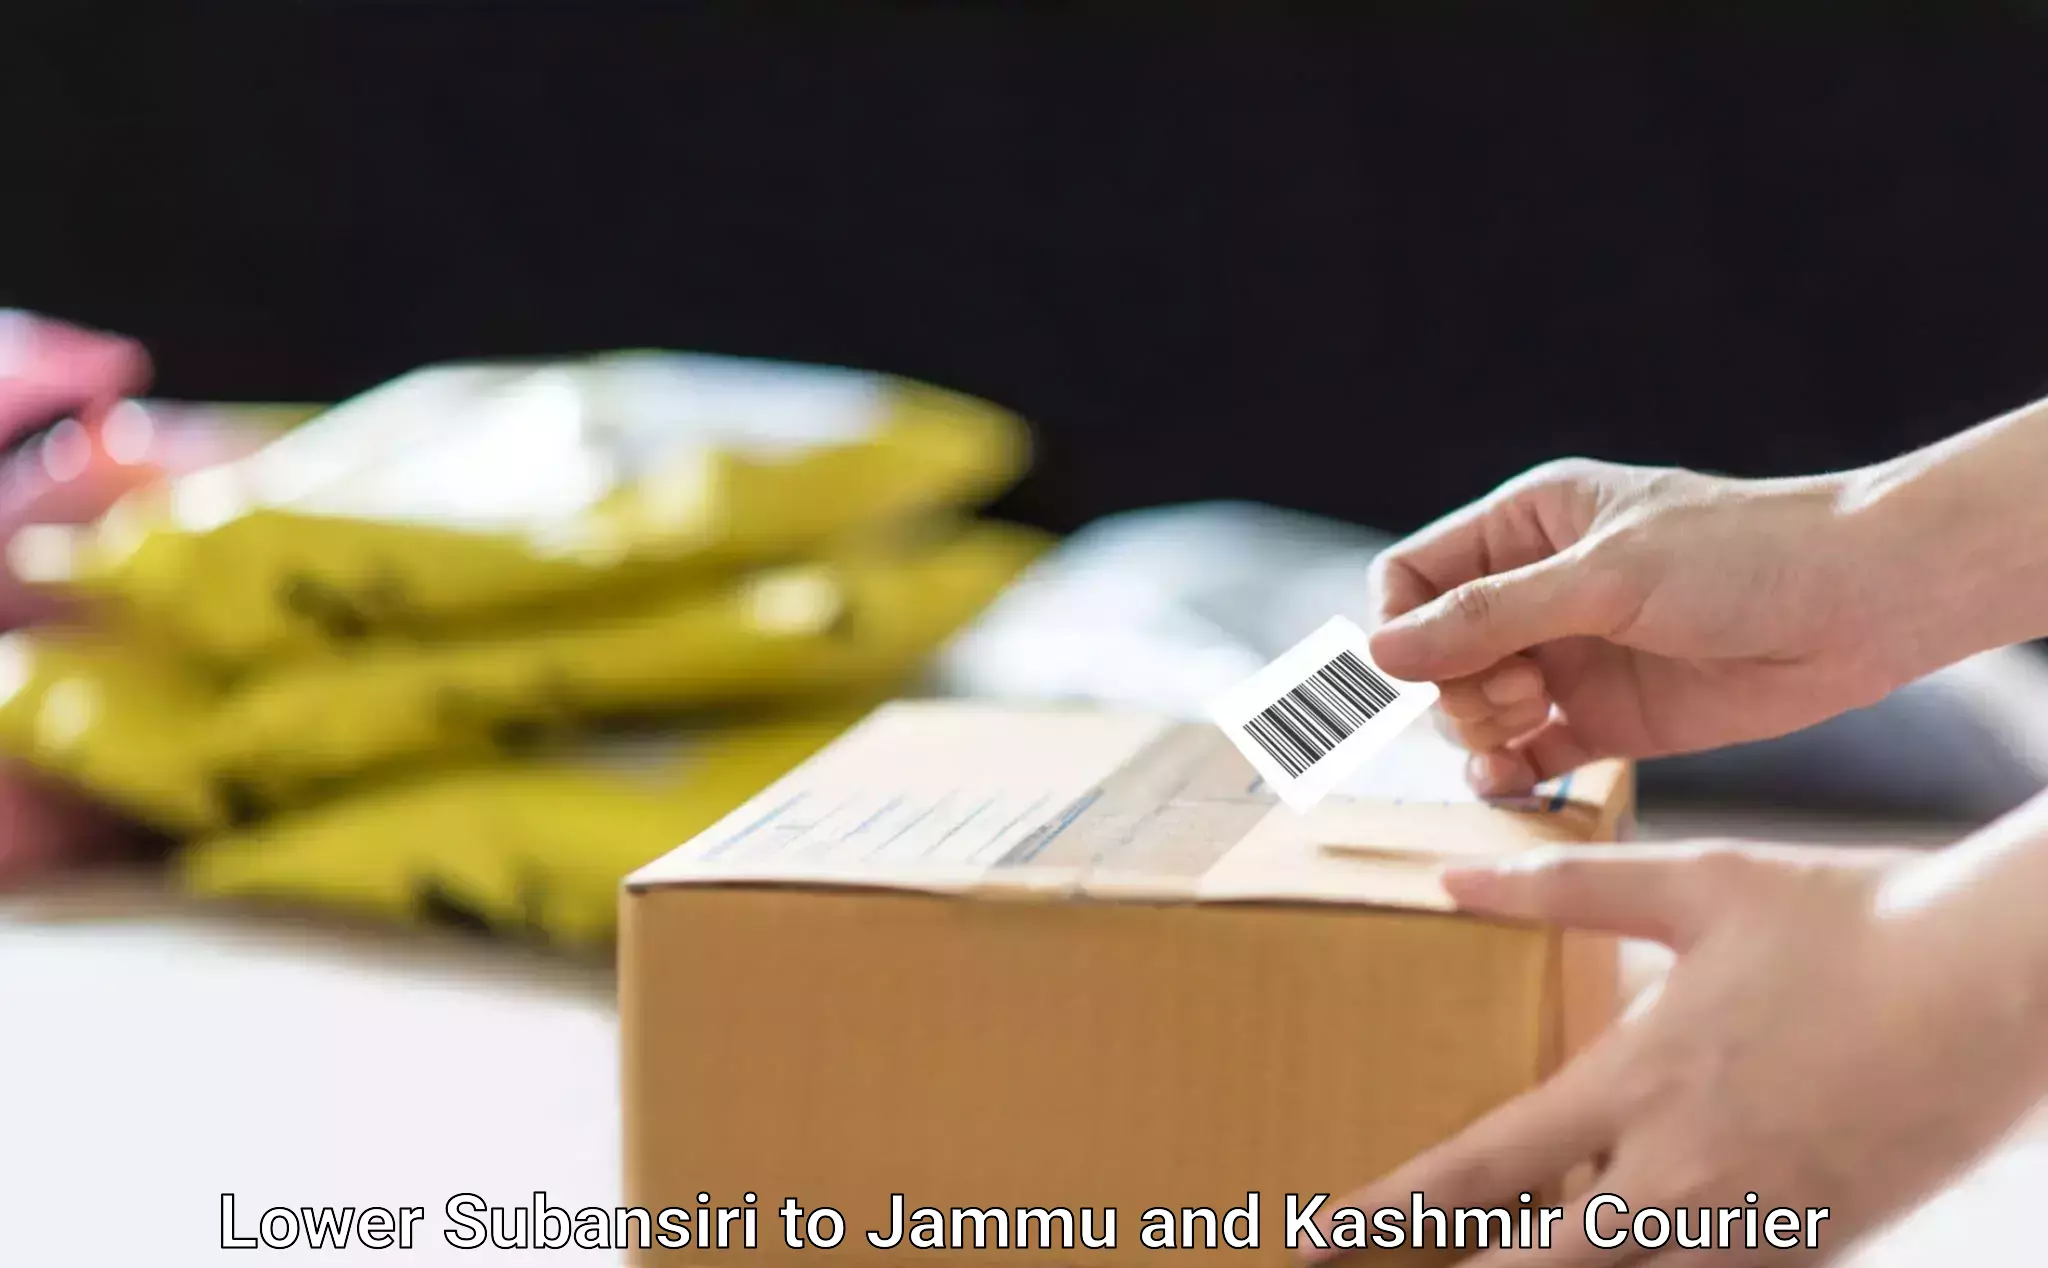 Reliable delivery network Lower Subansiri to Jammu and Kashmir